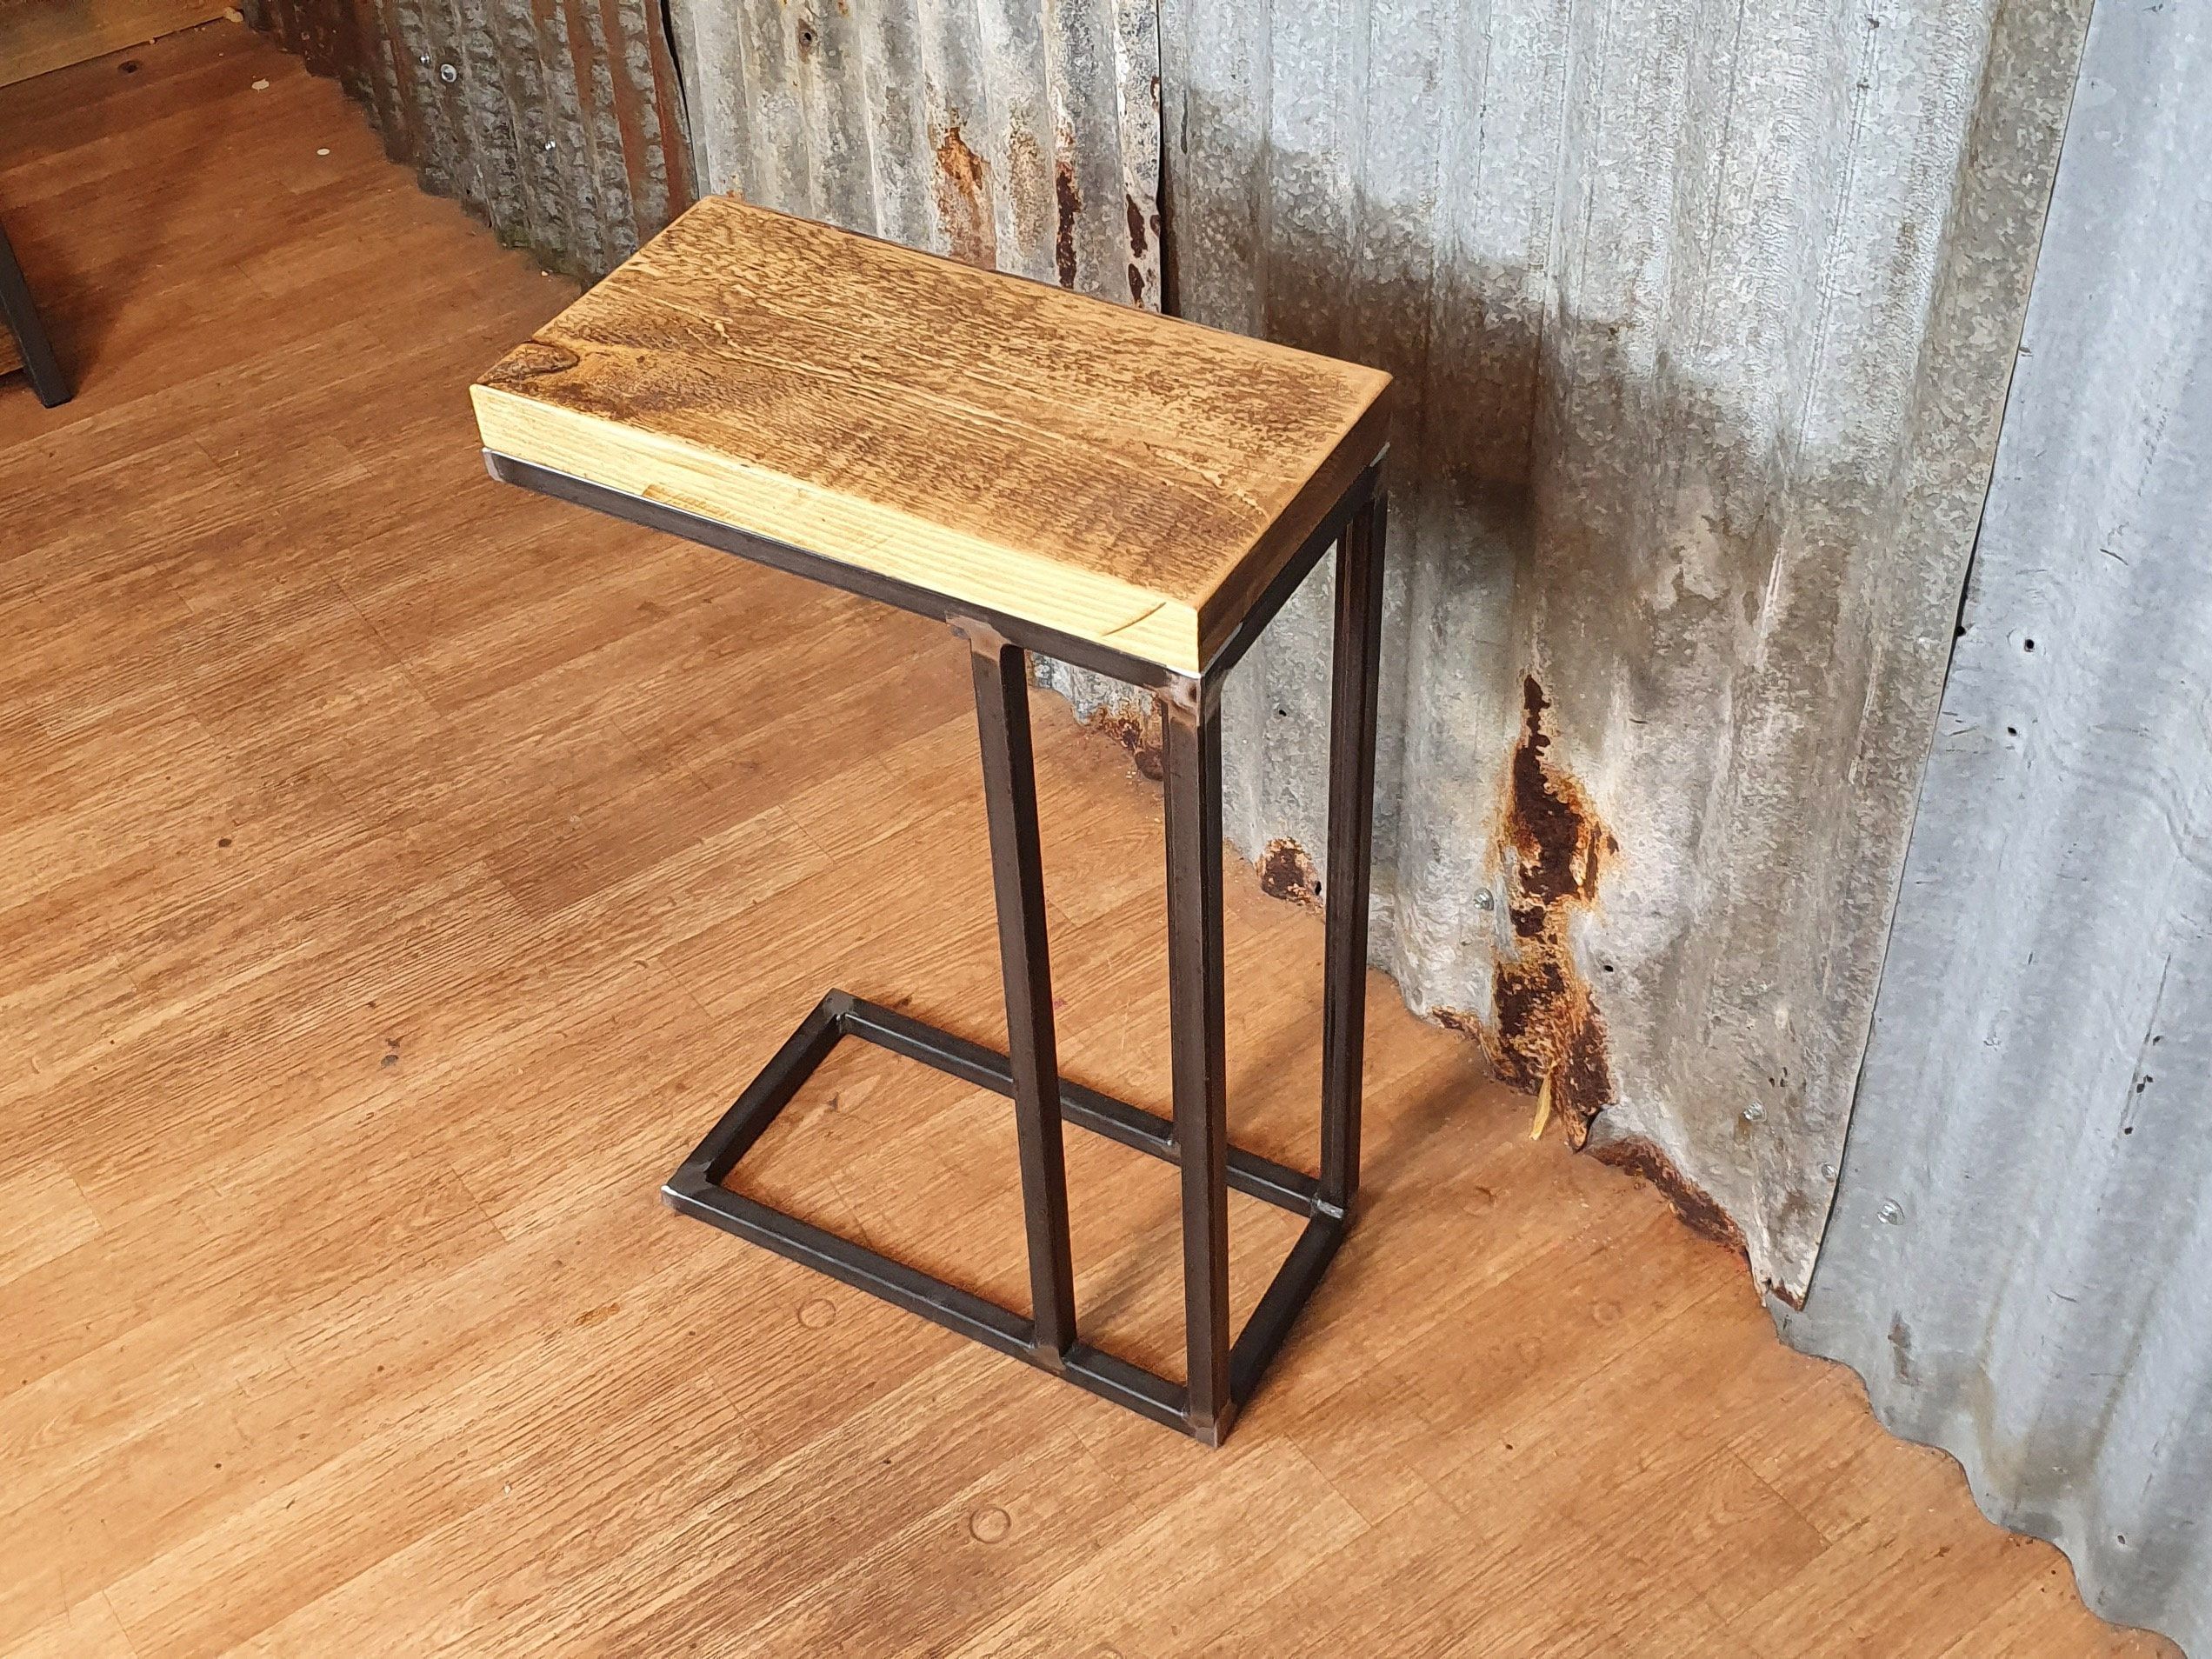 Most Recent Rustic Barnside Console Tables Intended For Rustic Industrial Sofa Side Table, Wooden C Shaped Lap (View 10 of 10)